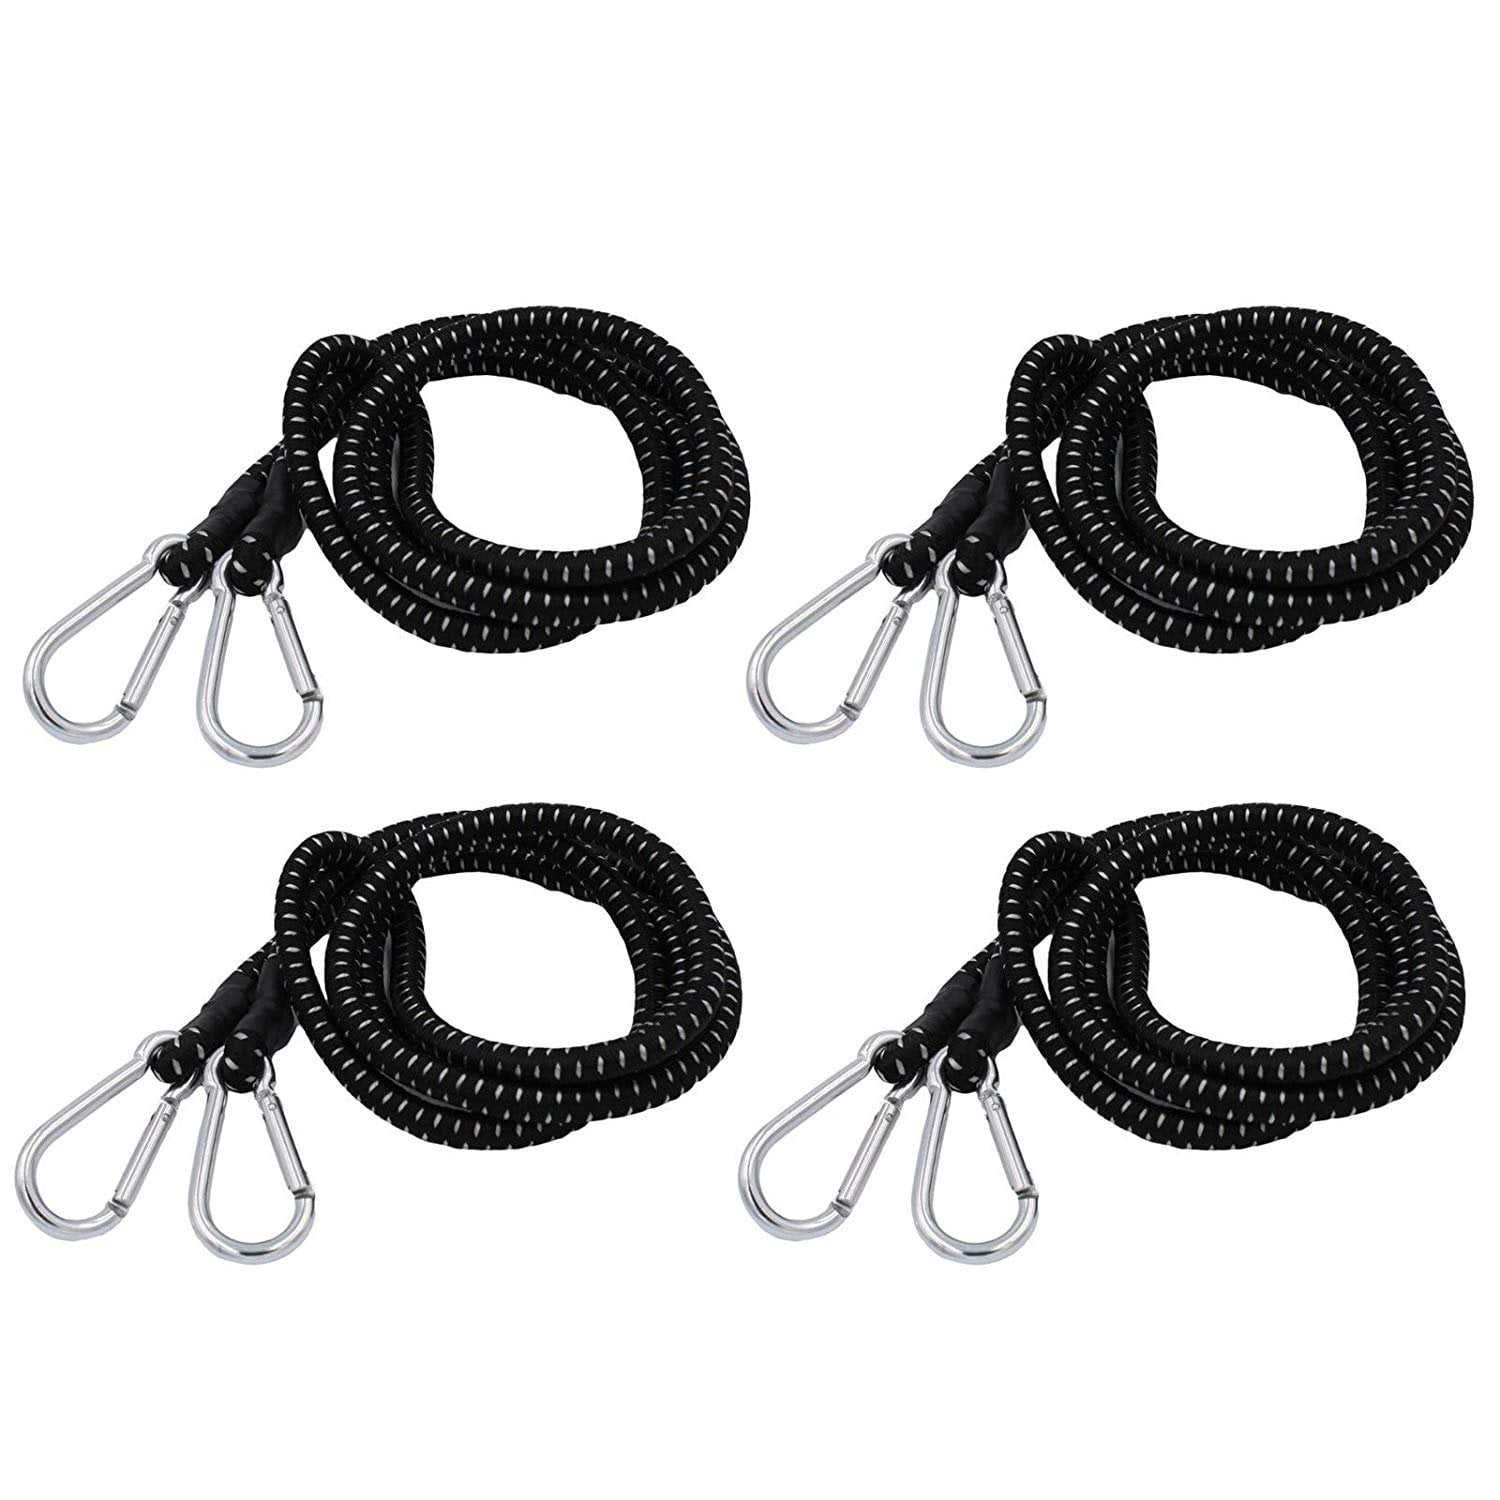 Bungee Cords with Hooks Heavy Duty Bungee Cord with Carabiner Hook 24 Inch 4 